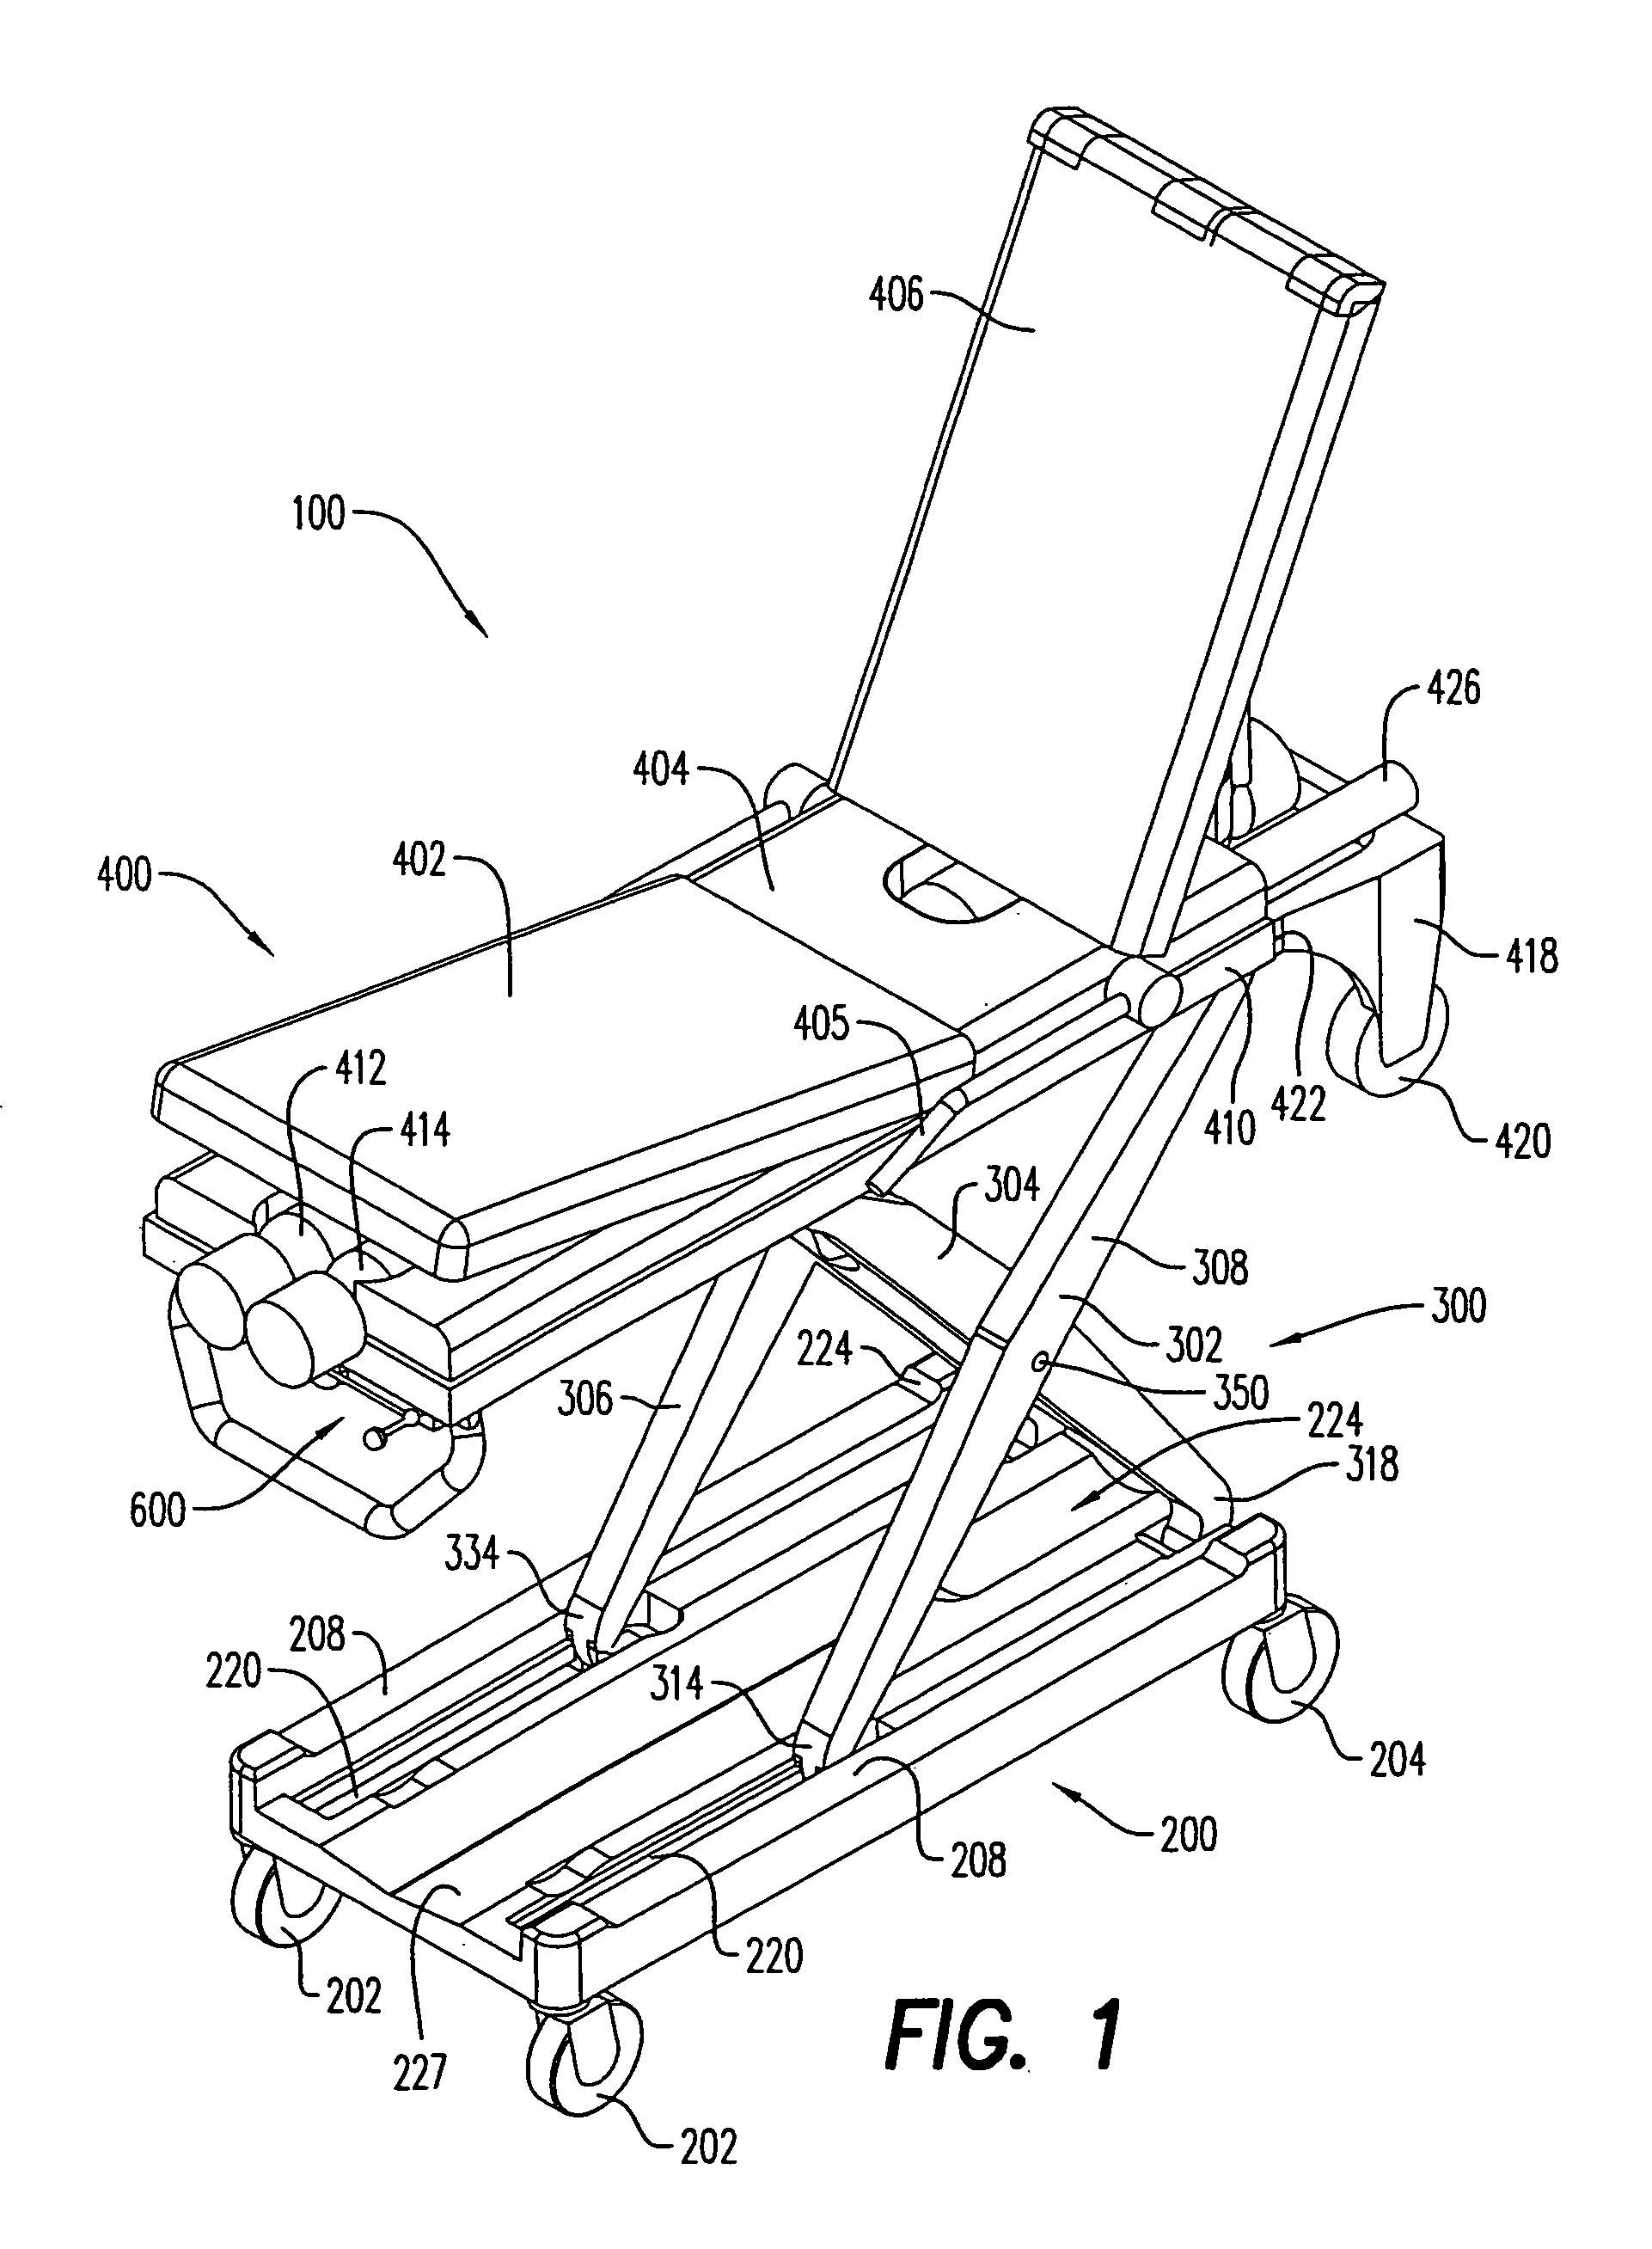 Lightweight mobile lift-assisted patient transport device